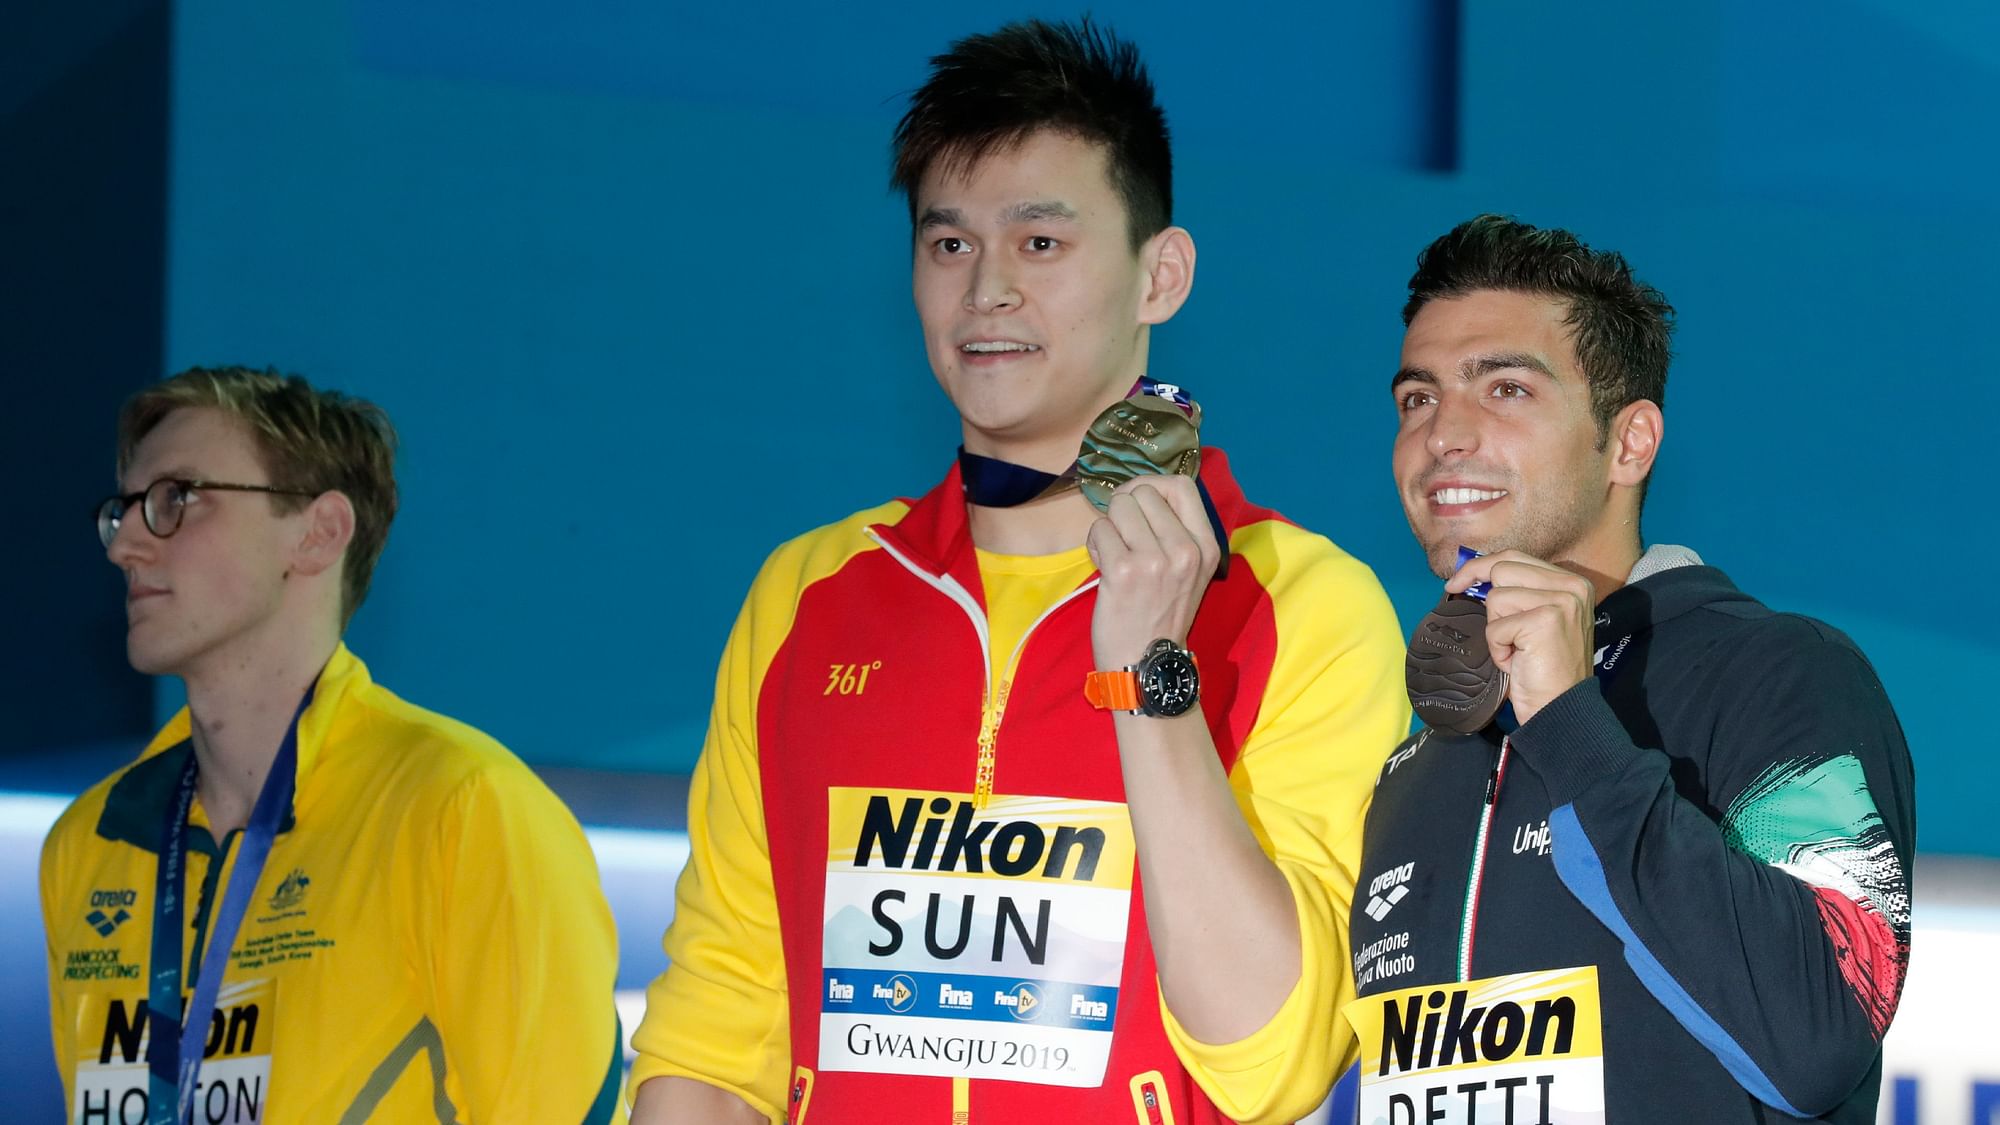 During the medal ceremony, Mack Horton (left) refused to share the podium with Sun Yang.